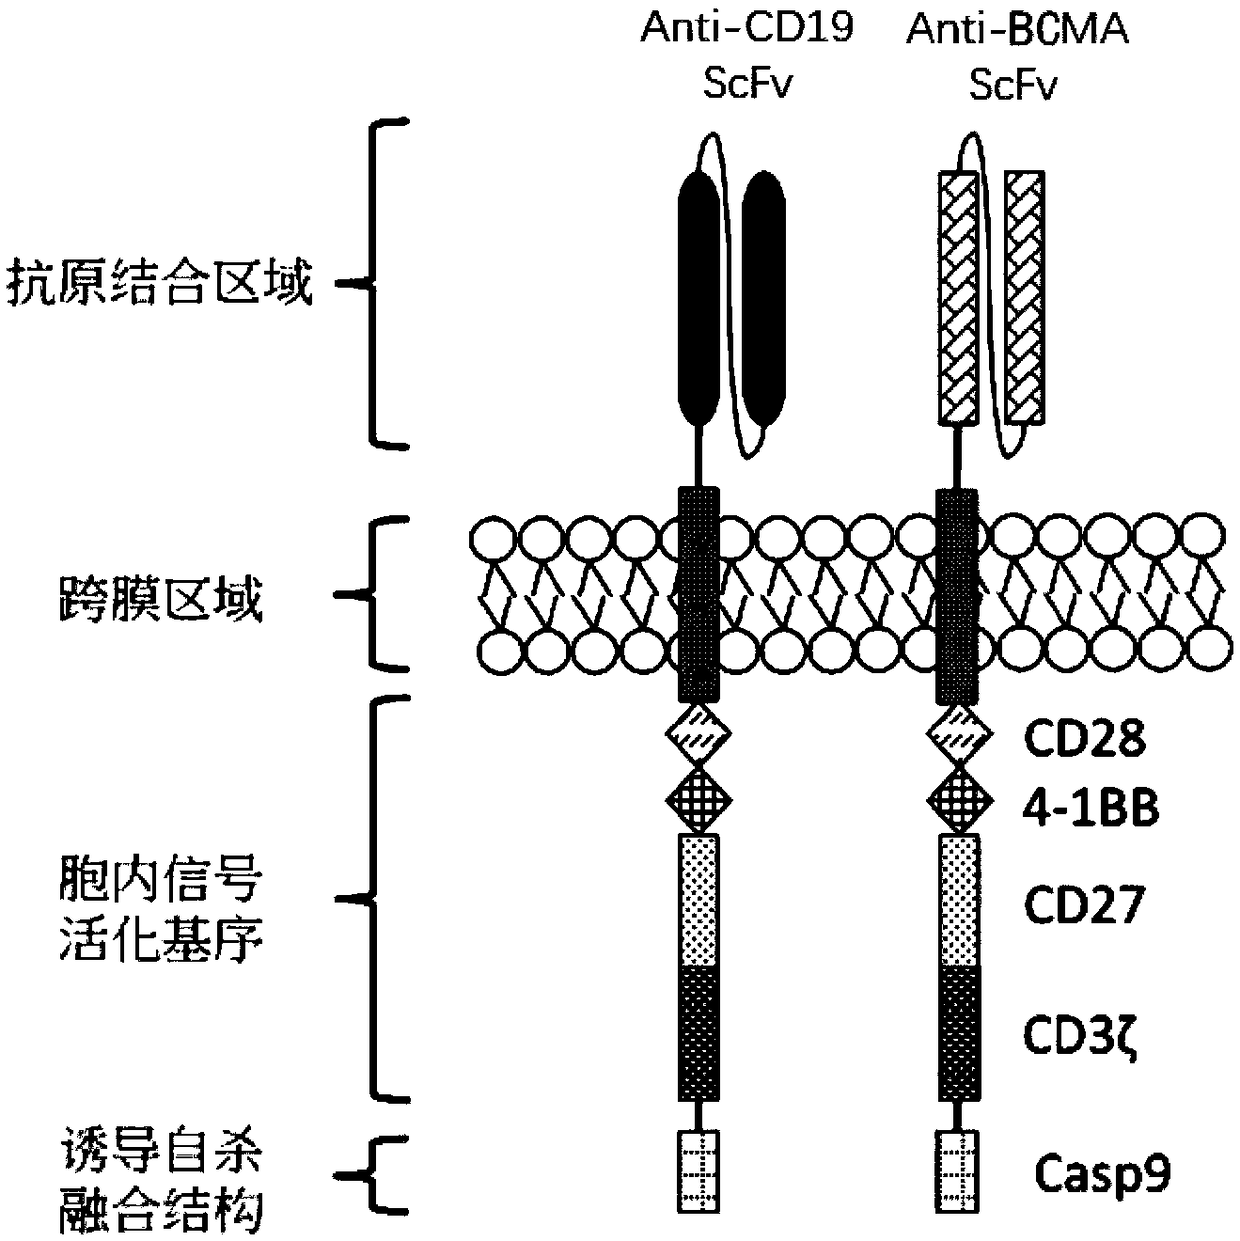 Double chimeric antigen receptor gene-modified immune cell based on CD19 and BCMA and application thereof